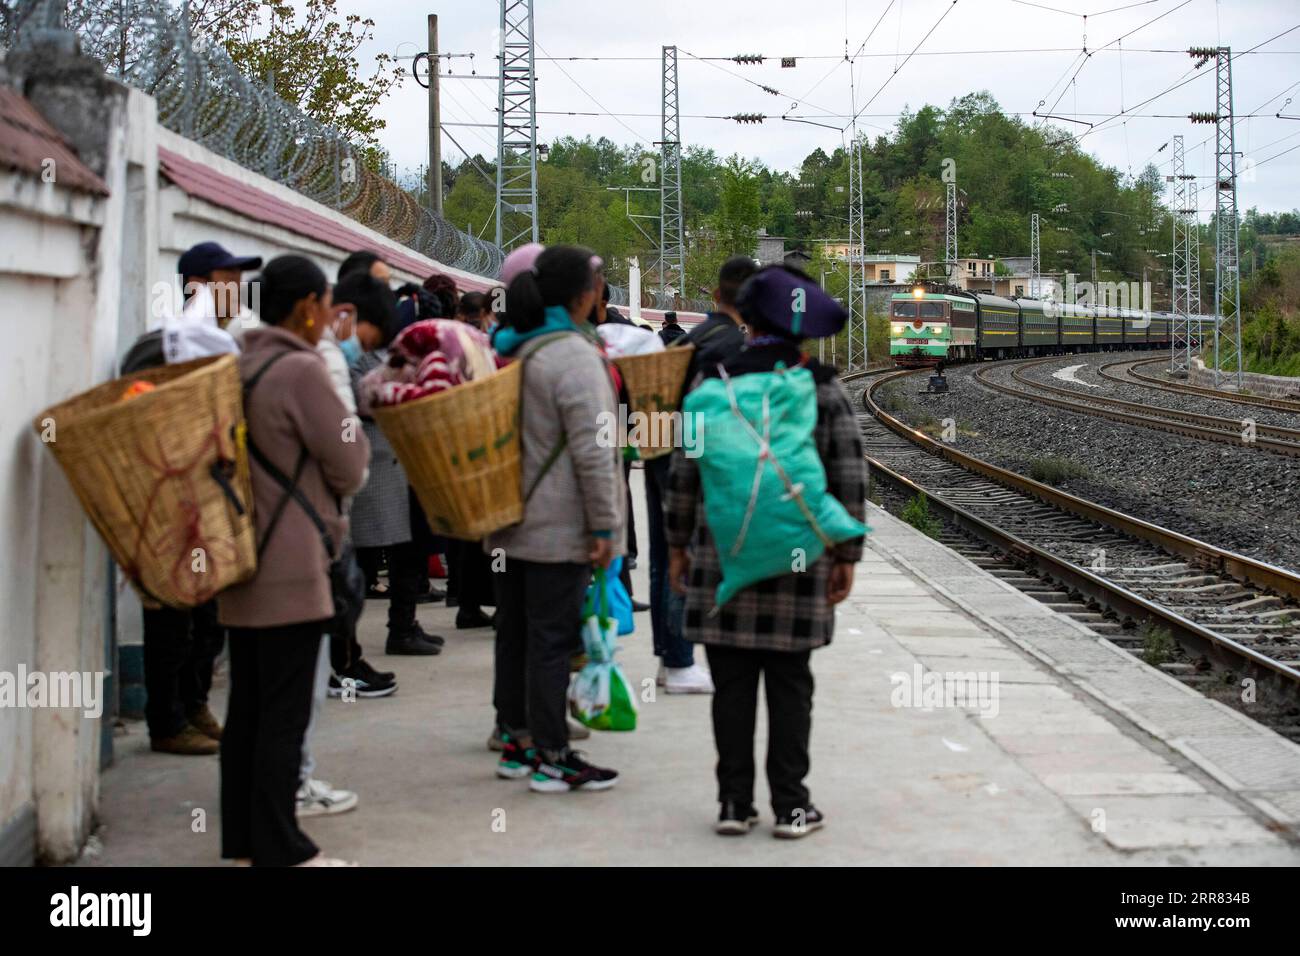 210415 -- XICHANG, April 15, 2021 -- Passengers wait for boarding the 5633 train at Puxiong Station in southwest China s Sichuan Province, April 11, 2021. As modern high-speed trains shoot past new stations throughout China, a pair of slow-speed trains still run through Daliang Mountains. The 5633/5634 trains run between Puxiong and Panzhihua of Sichuan Province with an average speed less than 40 km per hour. The journey with 26 stations in between takes eleven hours and four minutes, with the ticket prices ranging from 2 yuan to 25.5 yuanabout 0.3-3.9 U.S. dollars. The slow-speed trains send Stock Photo